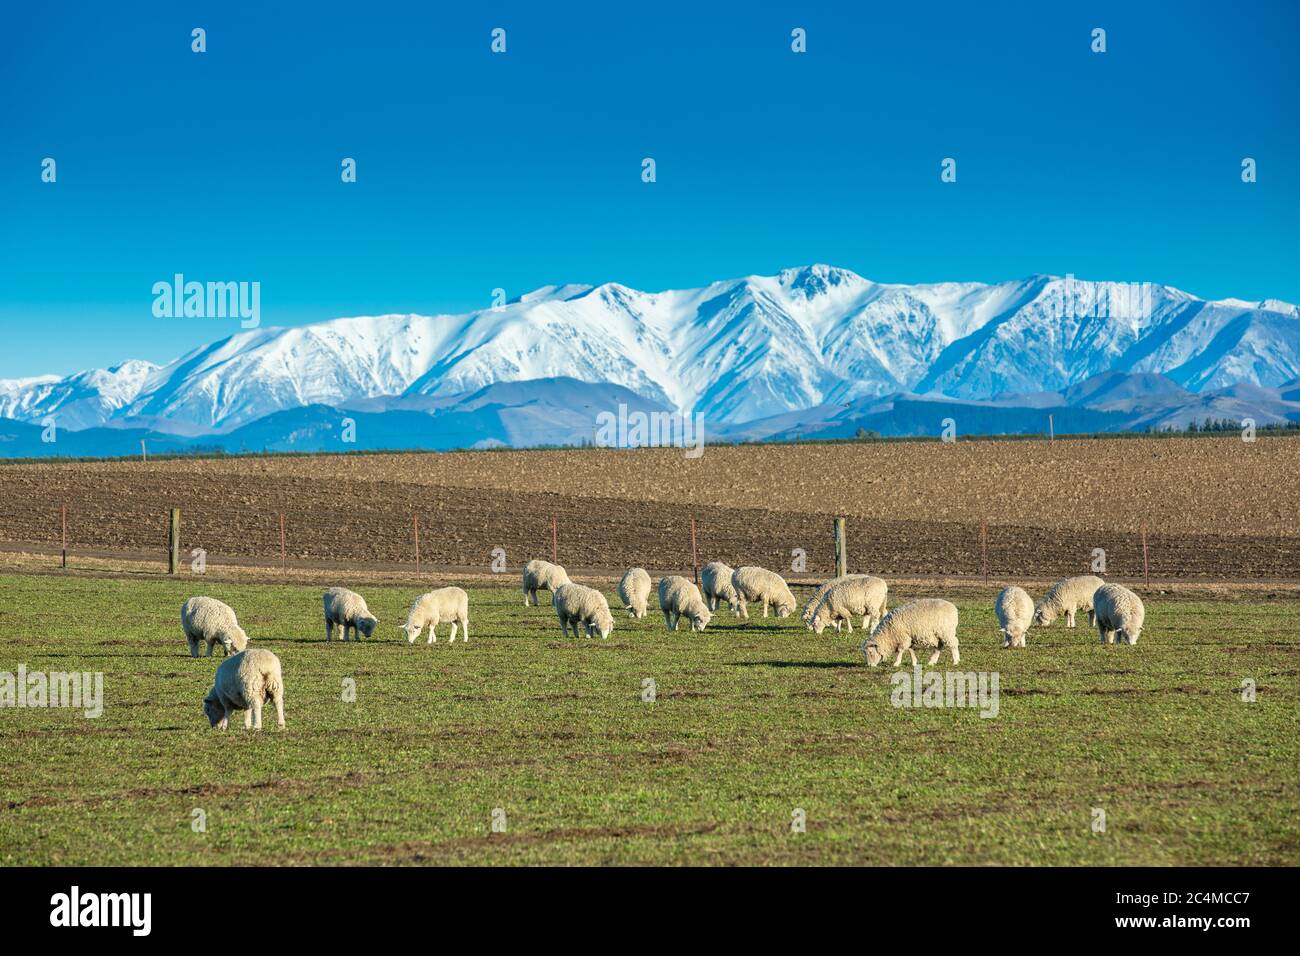 Beautiful landscape of the New Zealand - hills covered by green grass with herds of sheep with snow mountain. Stock Photo